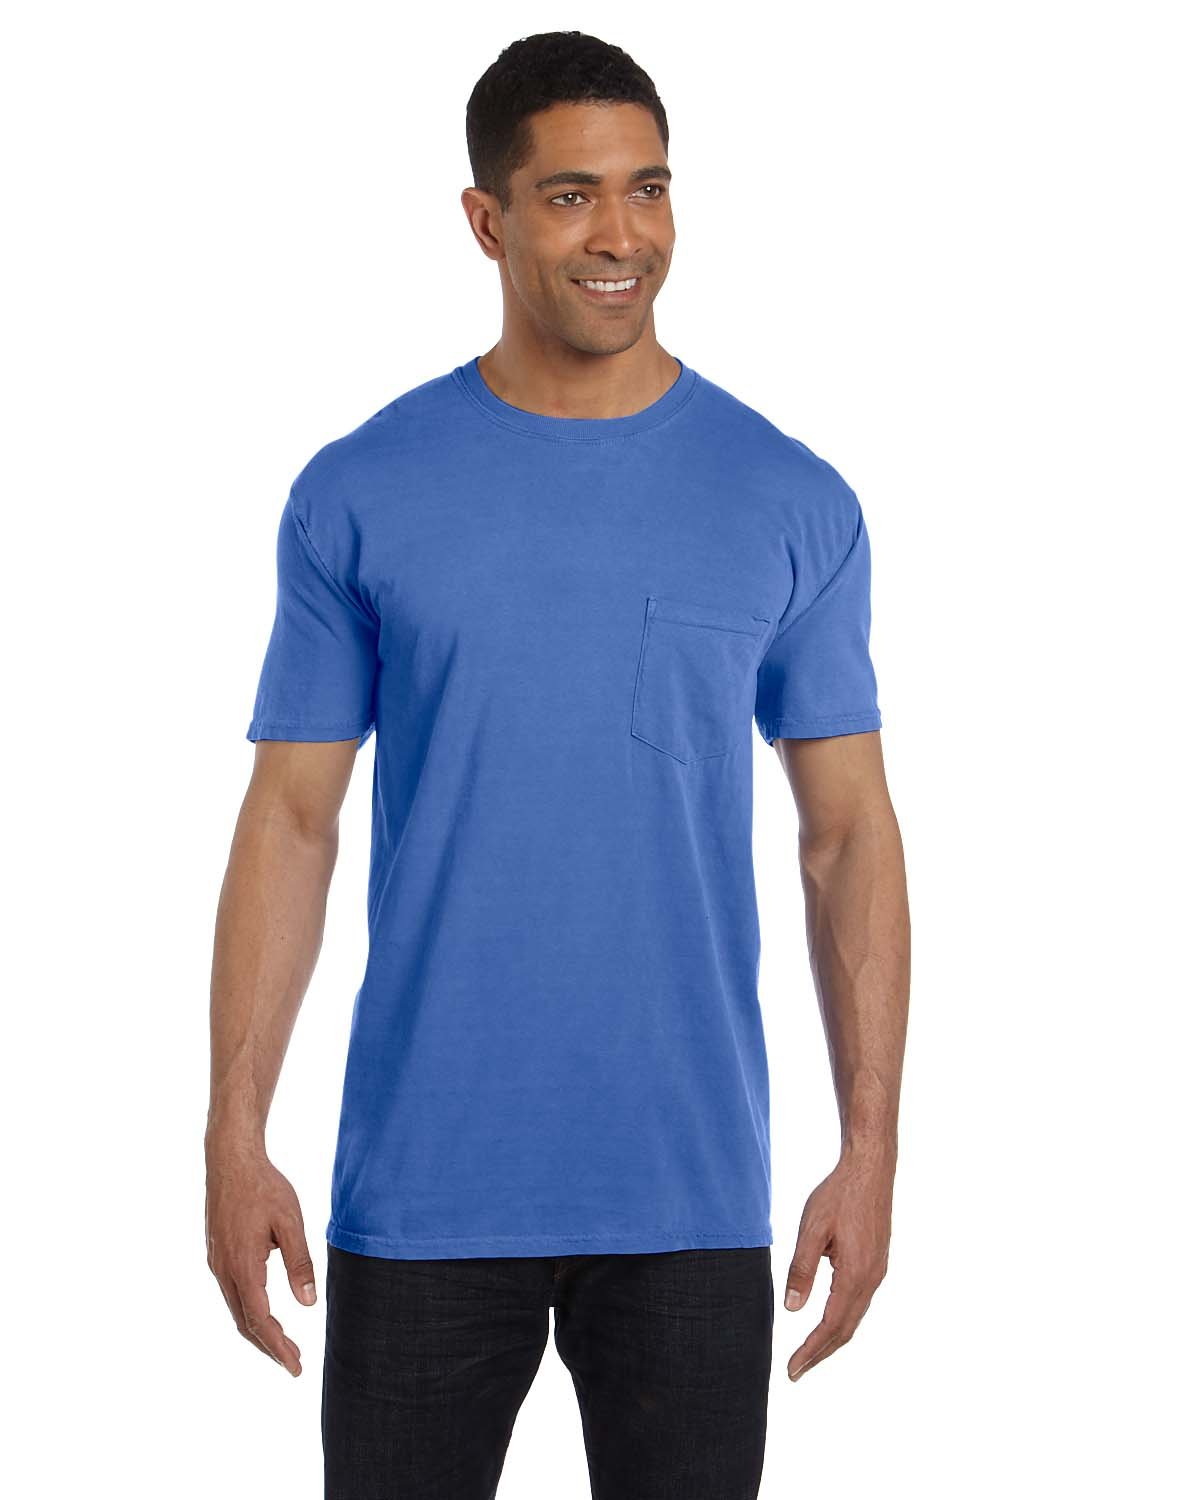 Comfort Colors Mens Adult Short Sleeve Pocket Tee, Style 6030 (Small, Neon Blue)